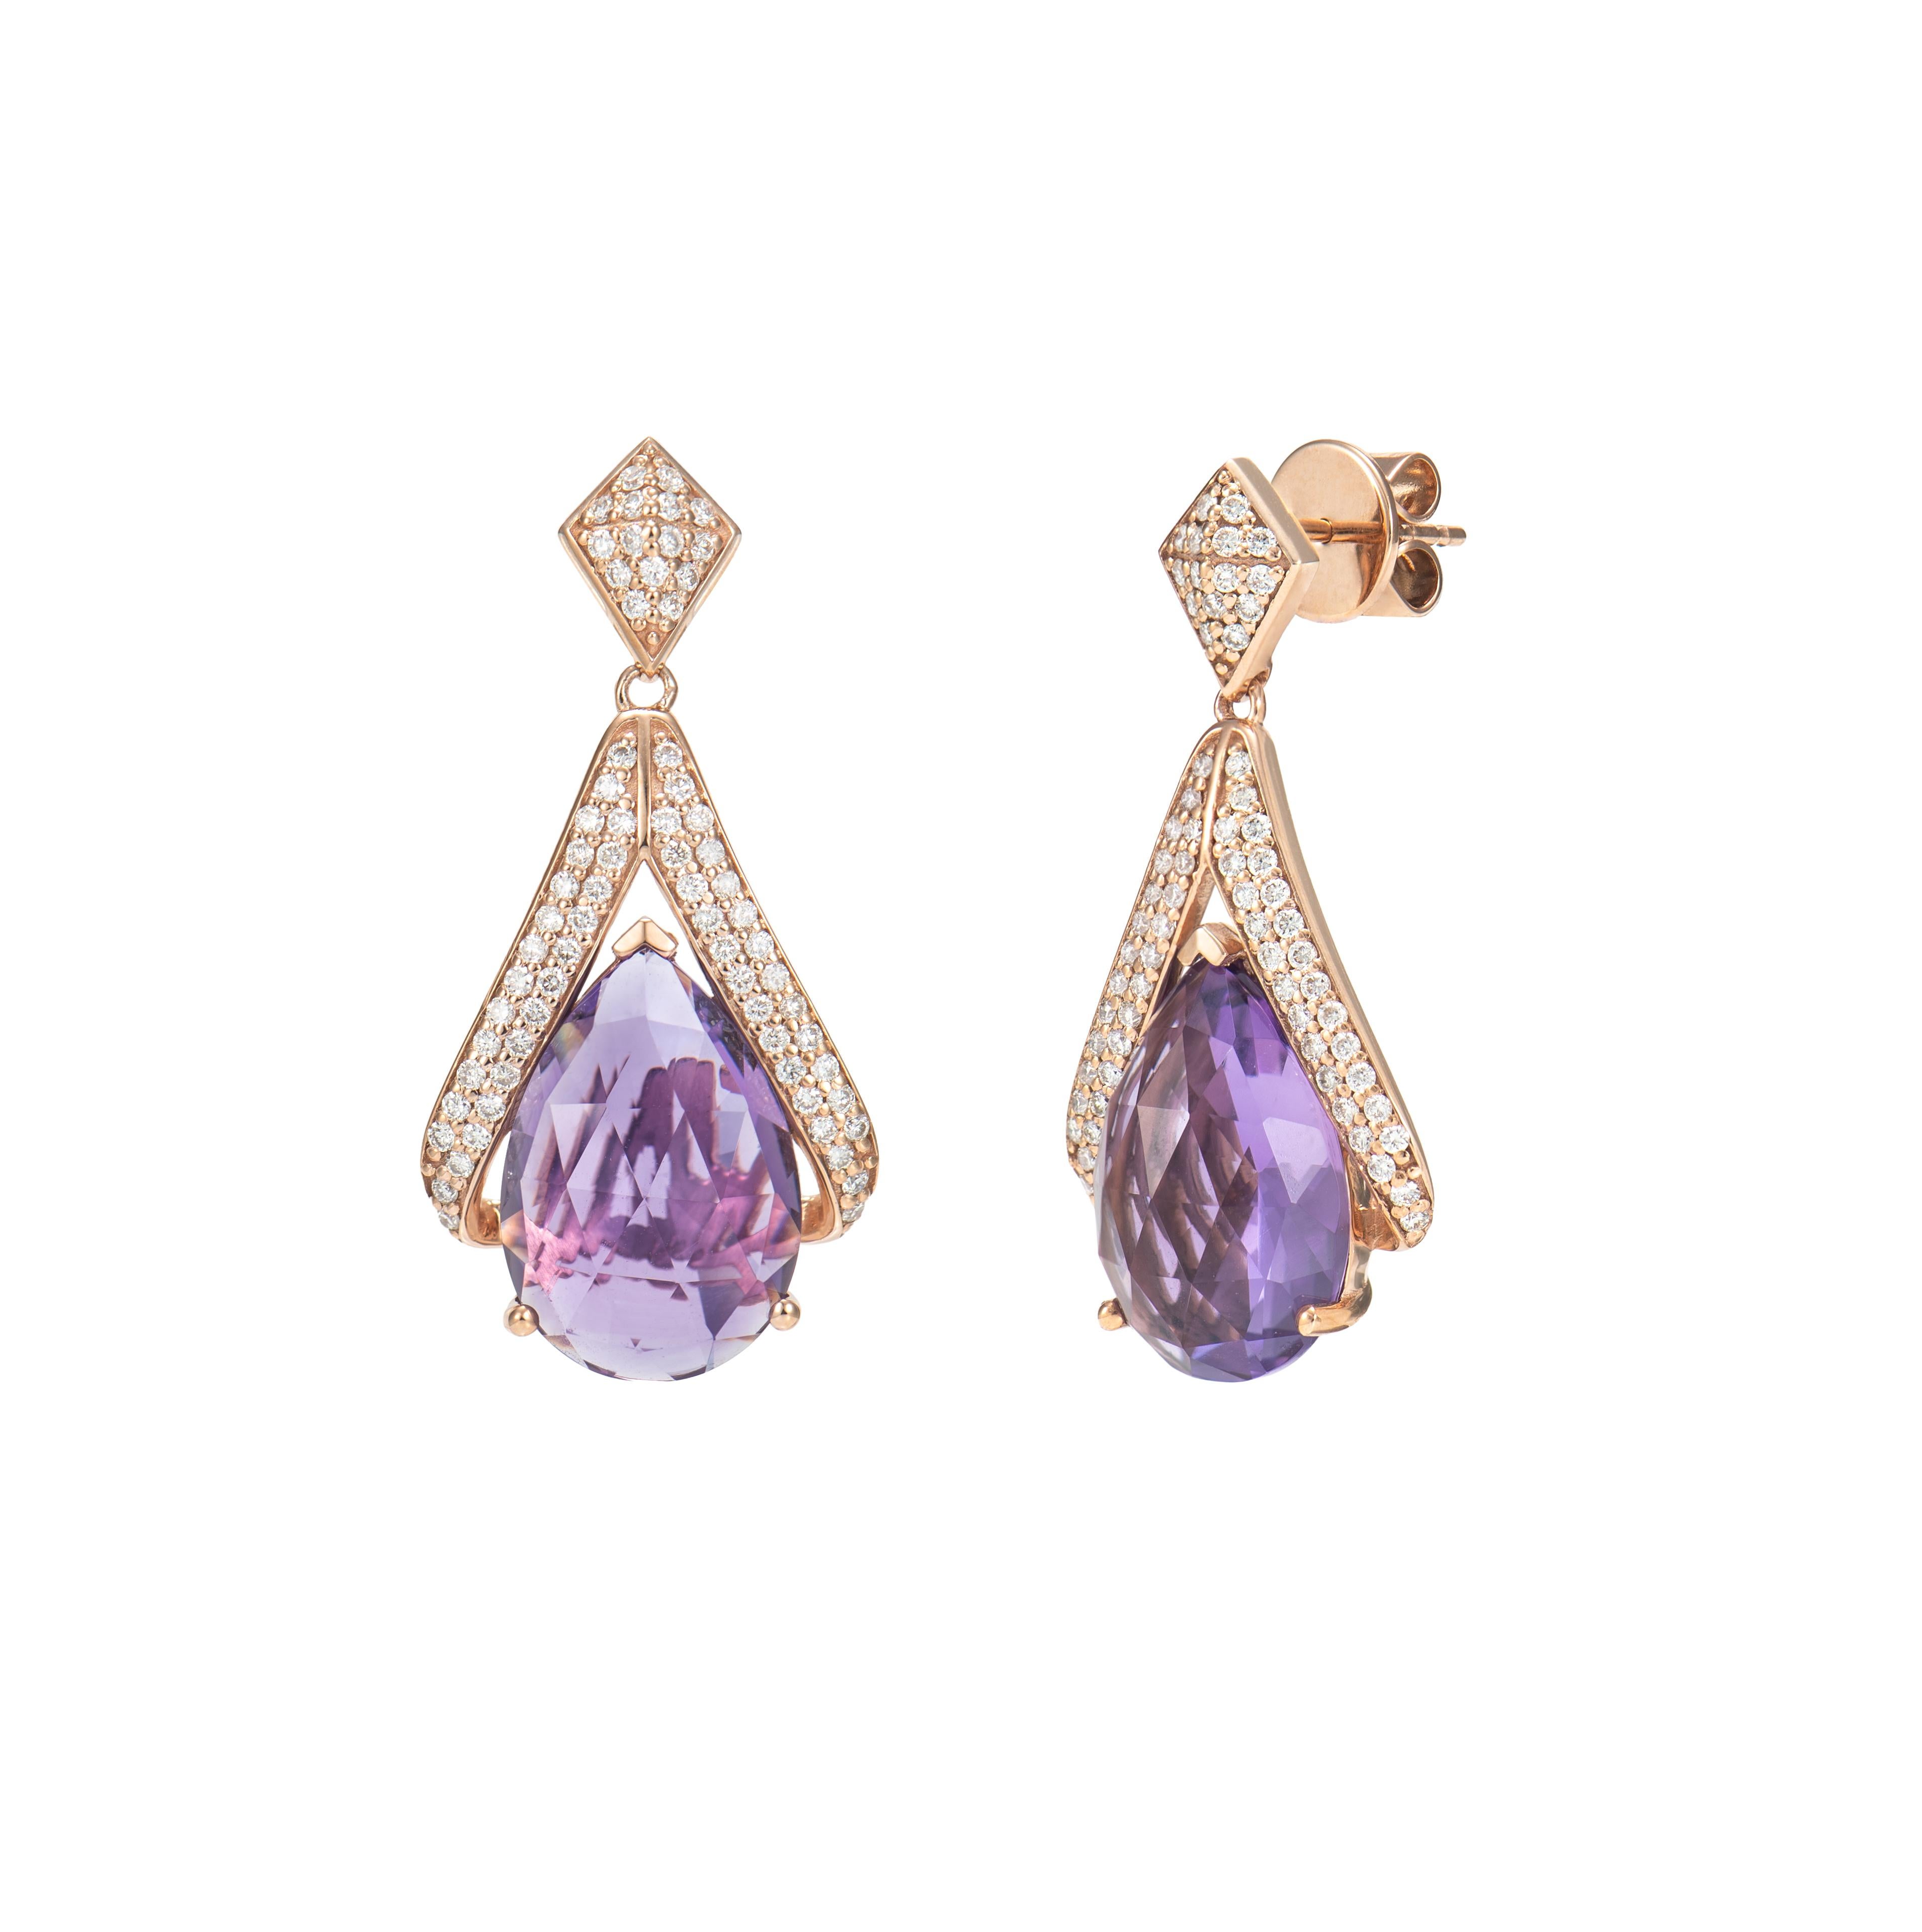 Contemporary Amethyst Drop Earring in 18 Karat Rose Gold with White Diamond. For Sale